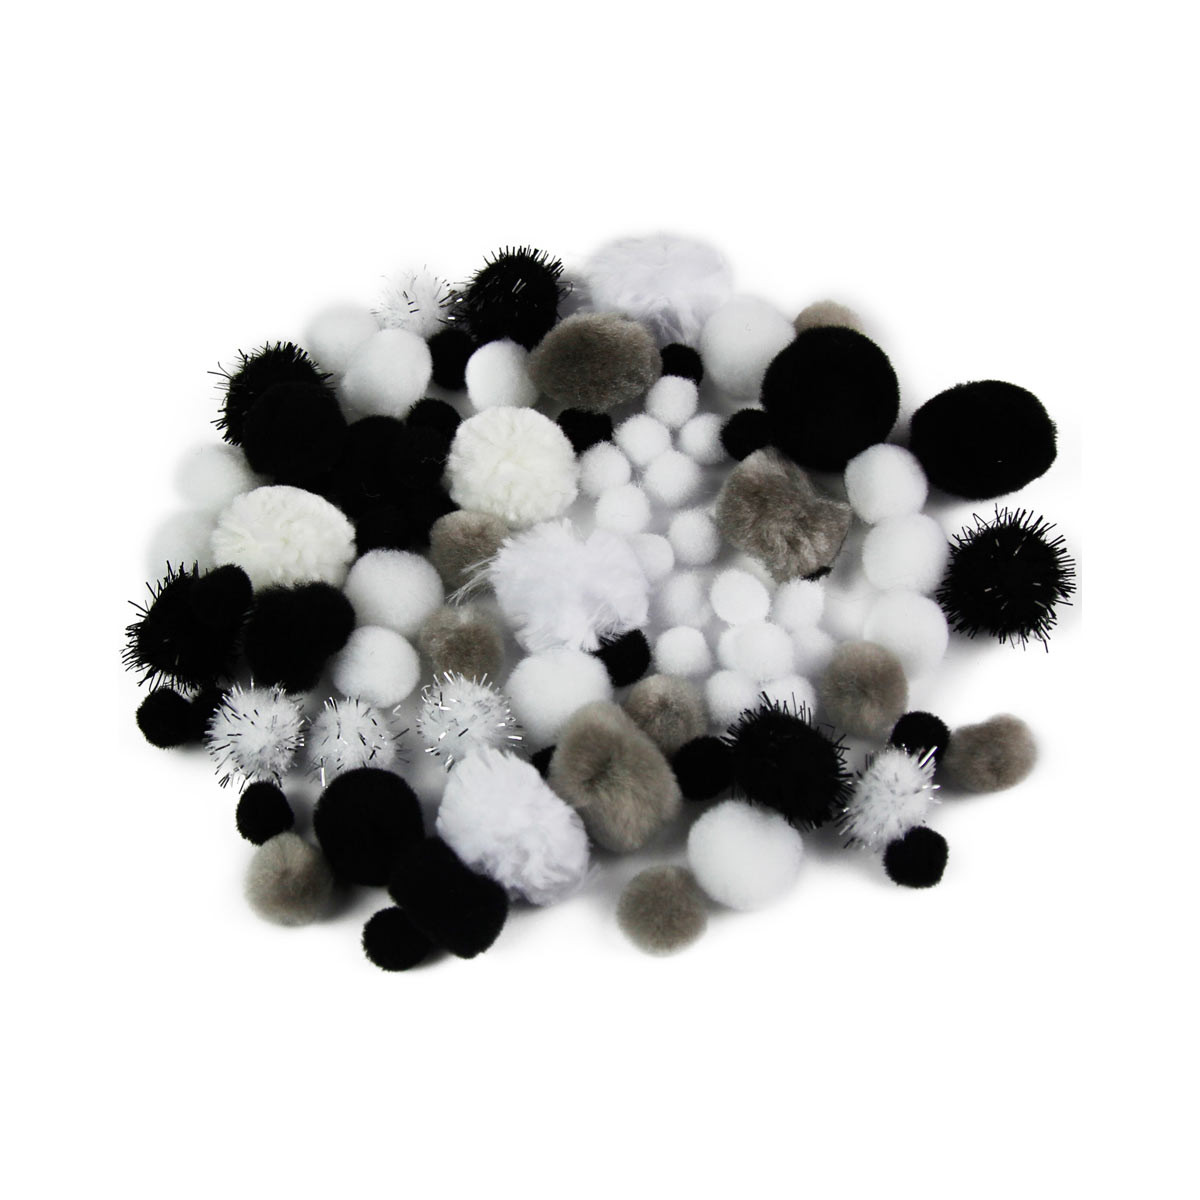 100pcs 25mm Cotton Yarn Mini Pompoms For Crafts And Jewelry Making Black